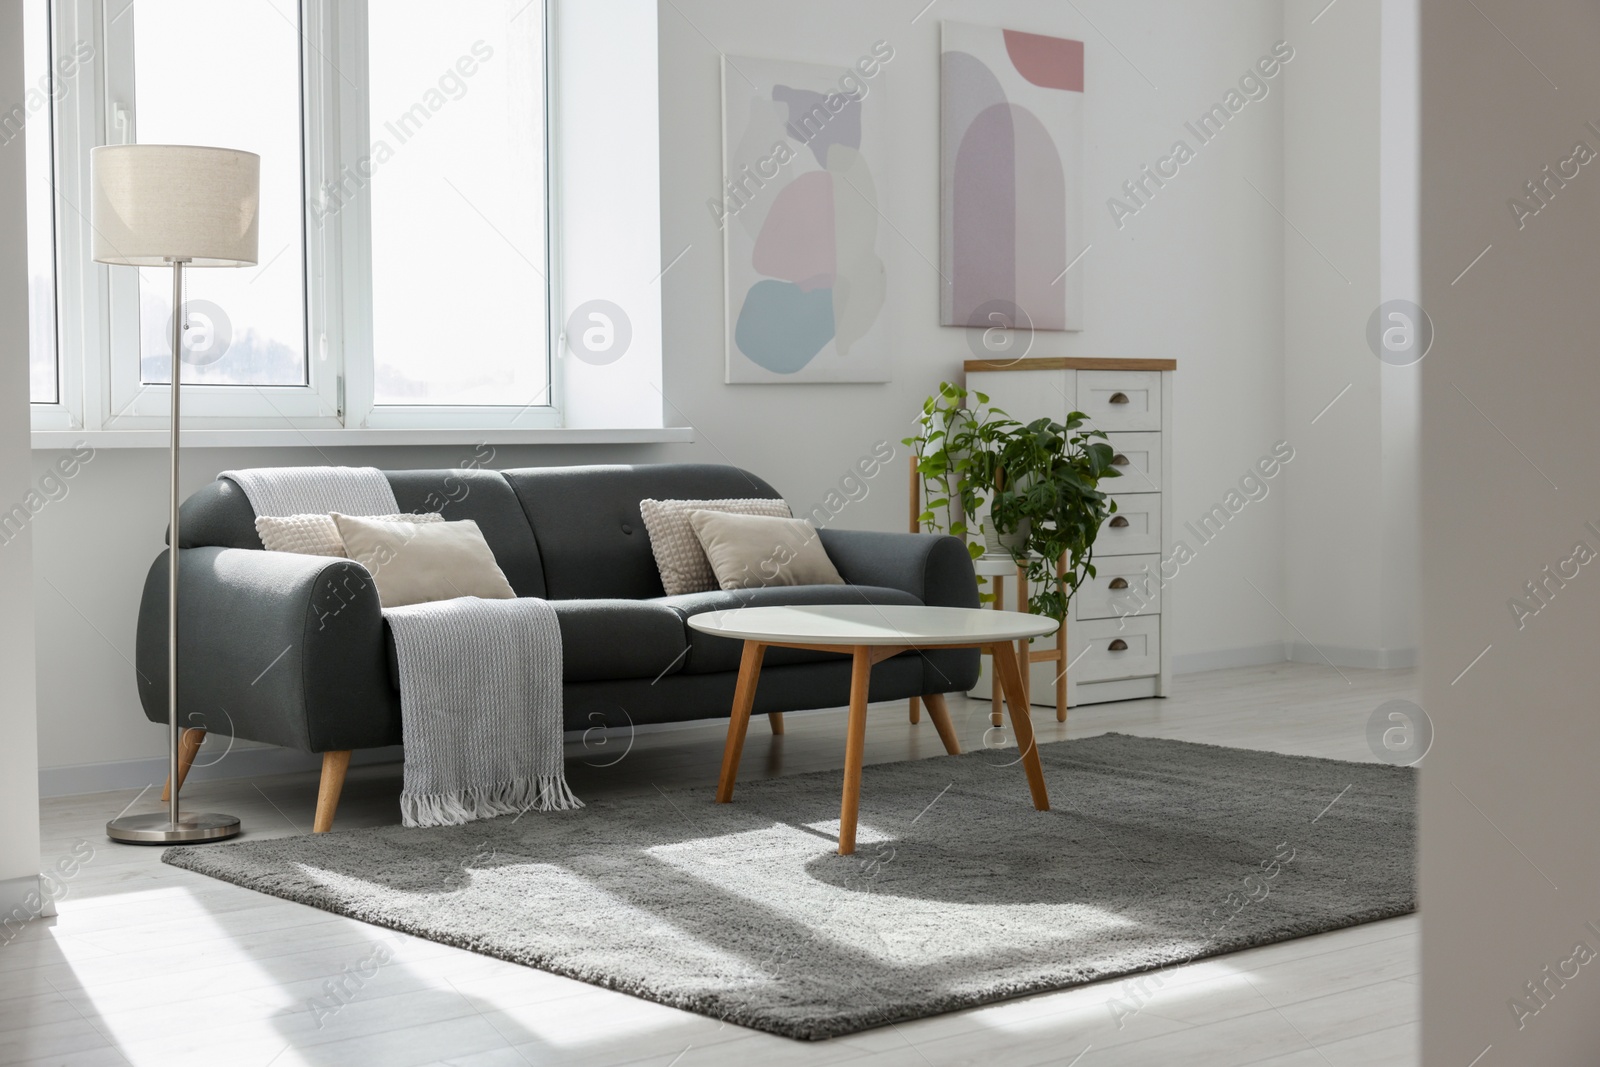 Photo of Stylish living room with gray couch, white coffee table and lamp. Interior design